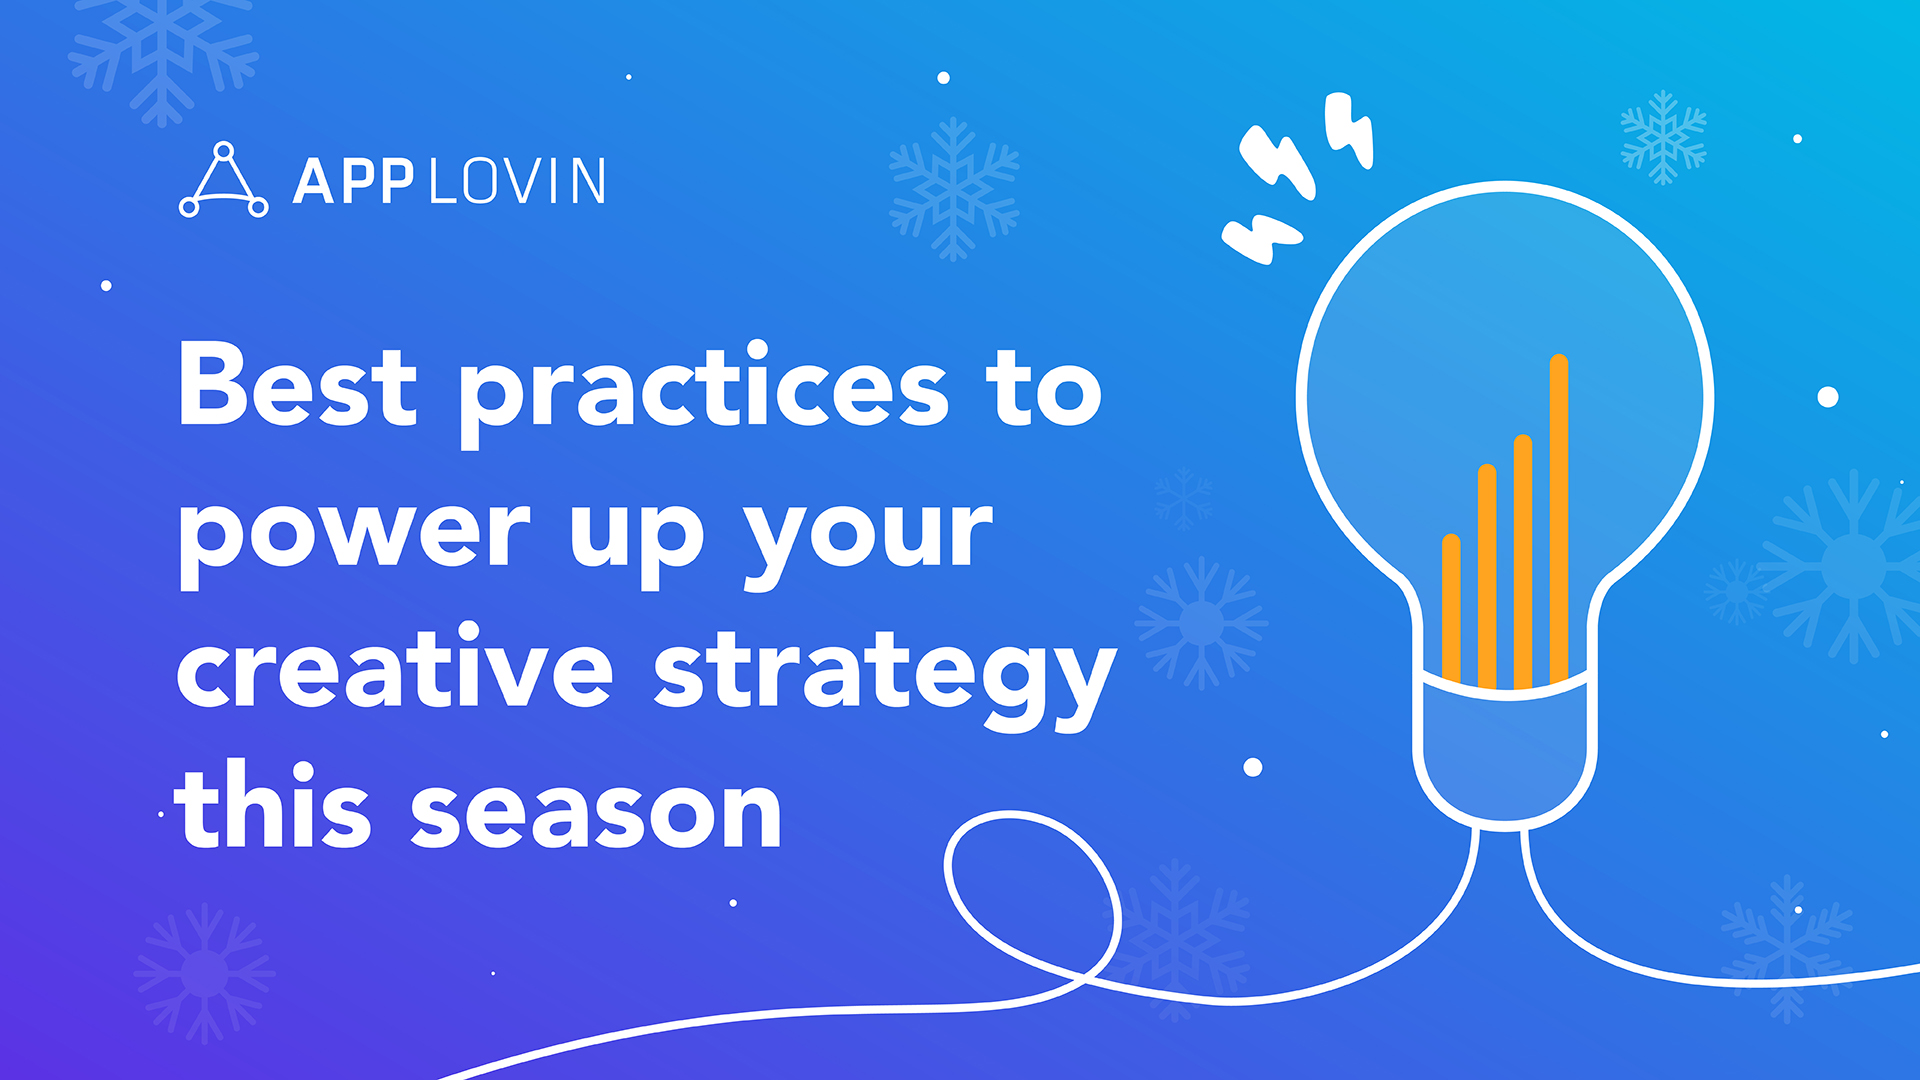 Best practices to power up your creative strategy this season